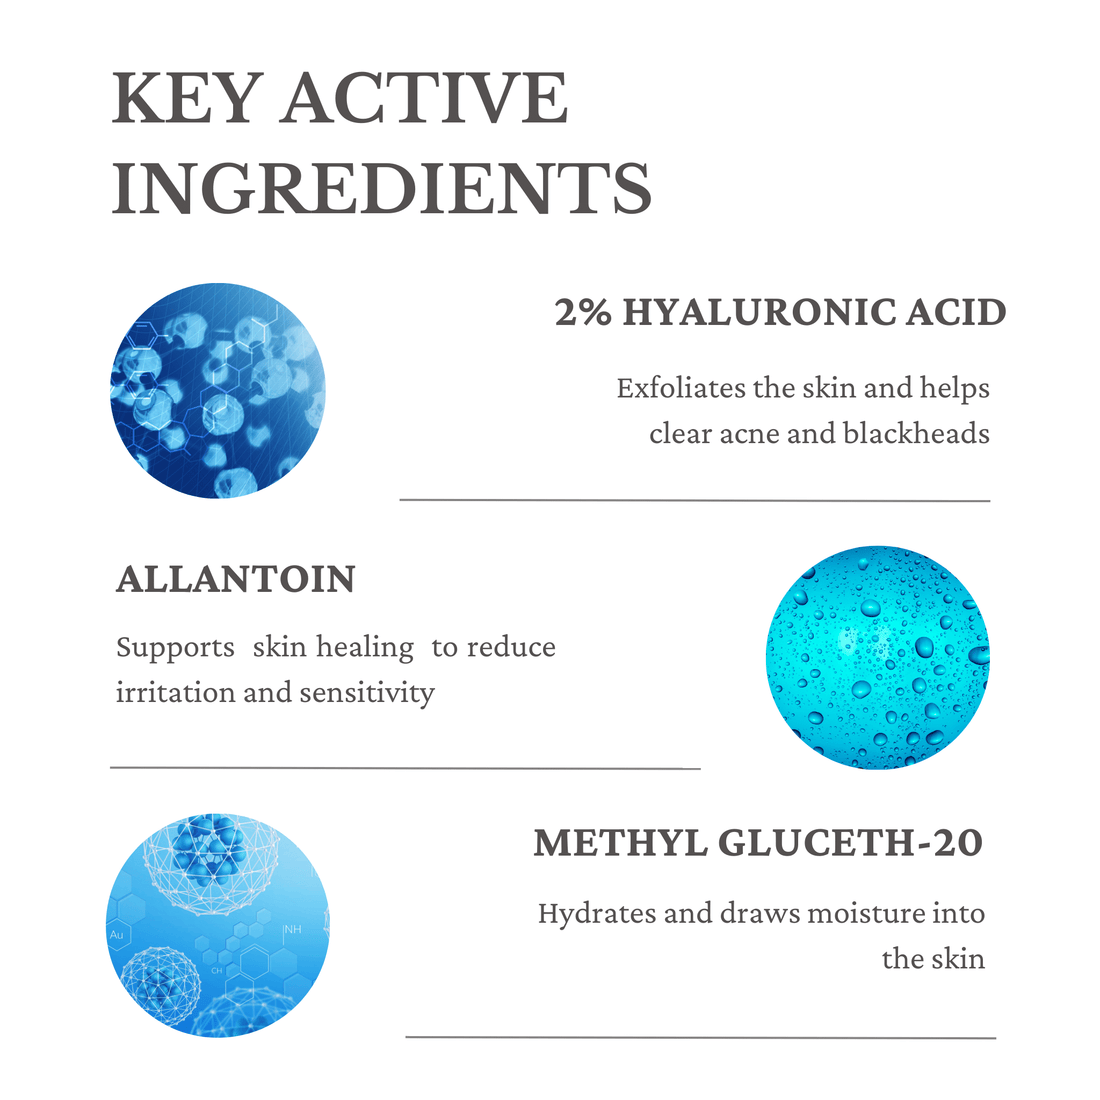 Key active ingredients of 2% Hyaluronic Acid Serum from Ecladerm